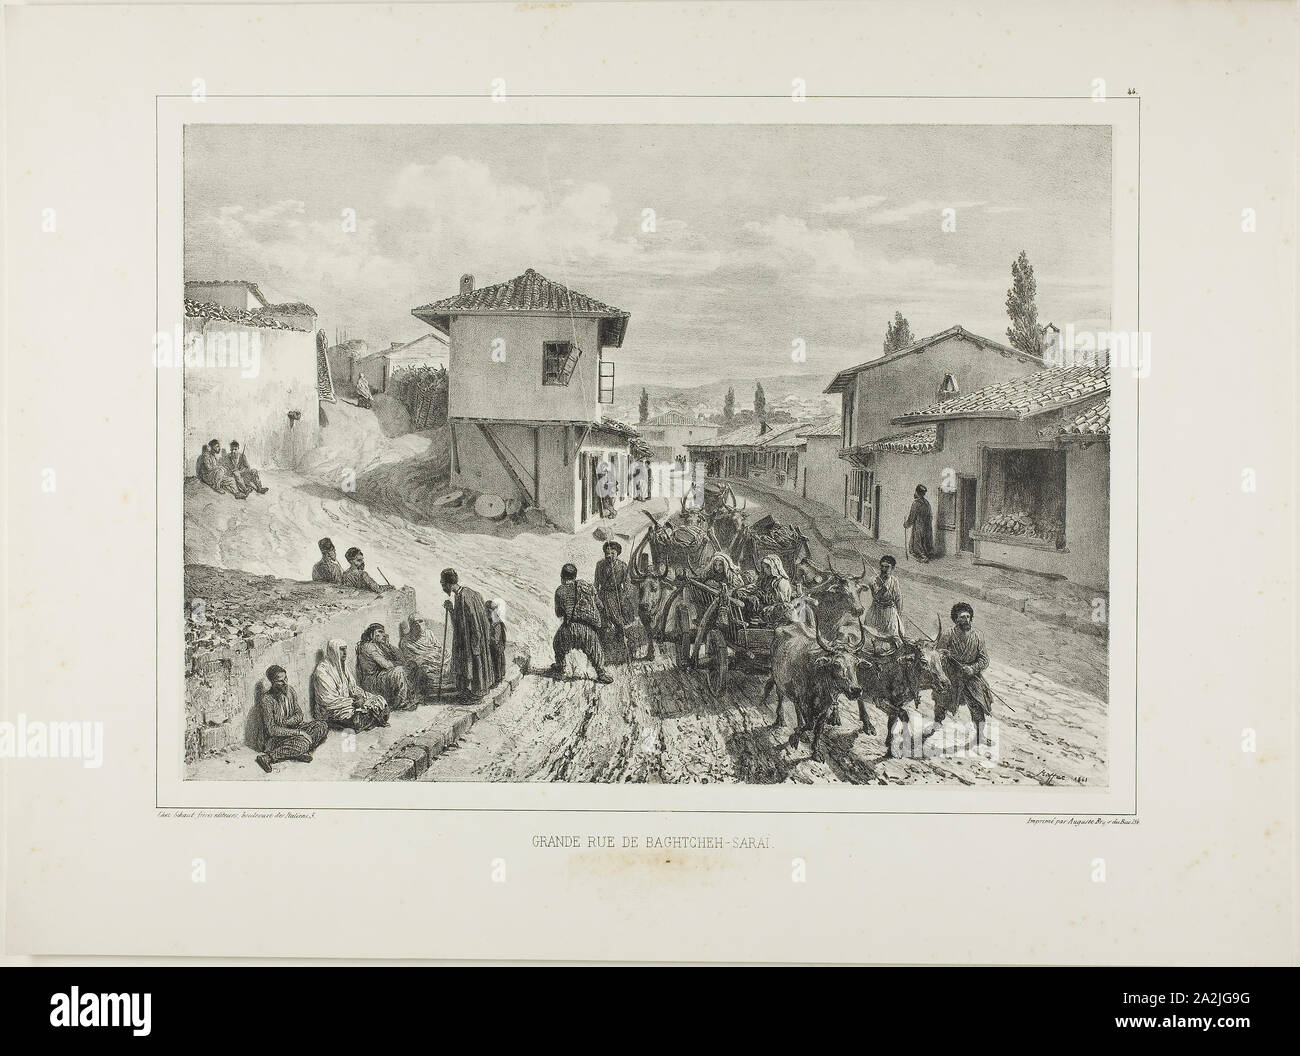 The Main Street of Baghtcheh-Saraï, Crimea, August 19, 1837, 1841, Denis Auguste Marie Raffet (French, 1804-1860), printed by Auguste Bry (French, 19th century), published by Chez Gihaut Frères (French, 19th century), France, Lithograph in black on ivory chine laid down on ivory wove paper, 232.5 × 327 mm (image), 235 × 330 mm (primary support), 339 × 456 mm (secondary support Stock Photo